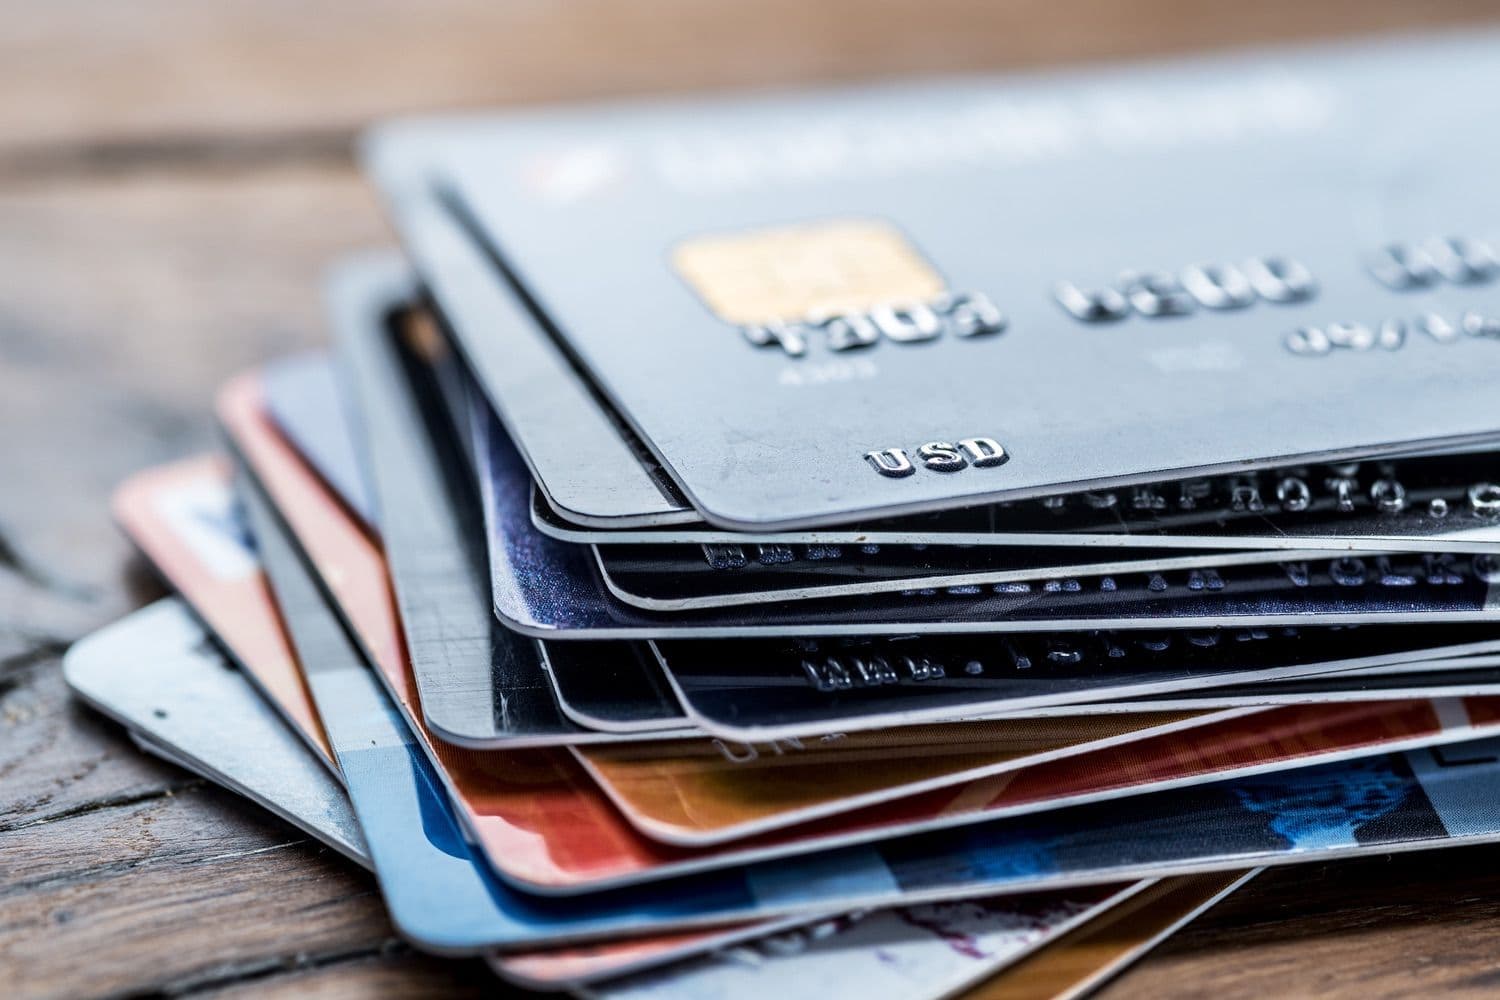 Finding subscriptions on all your Chase credit cards shouldn't be difficult.